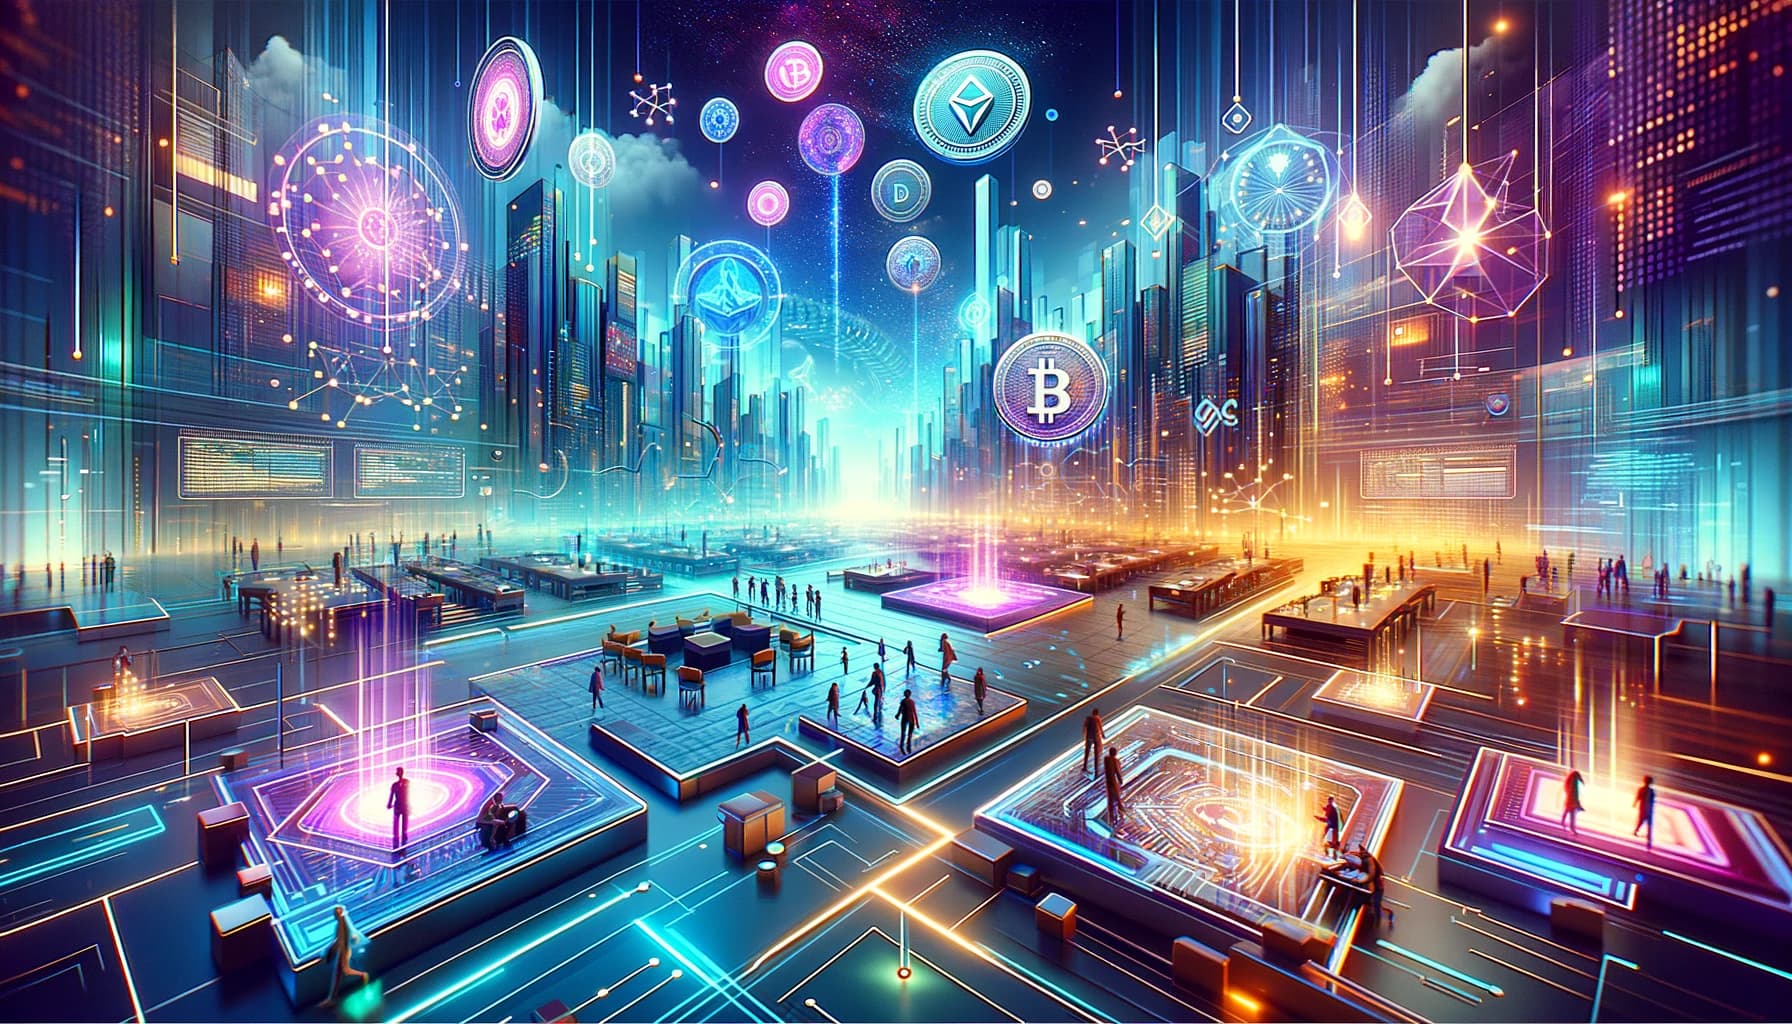 a large multi-leveled open area surrounded by floating bitcoin logos and high-rise buildings with people gathering on some of the elevated levels.